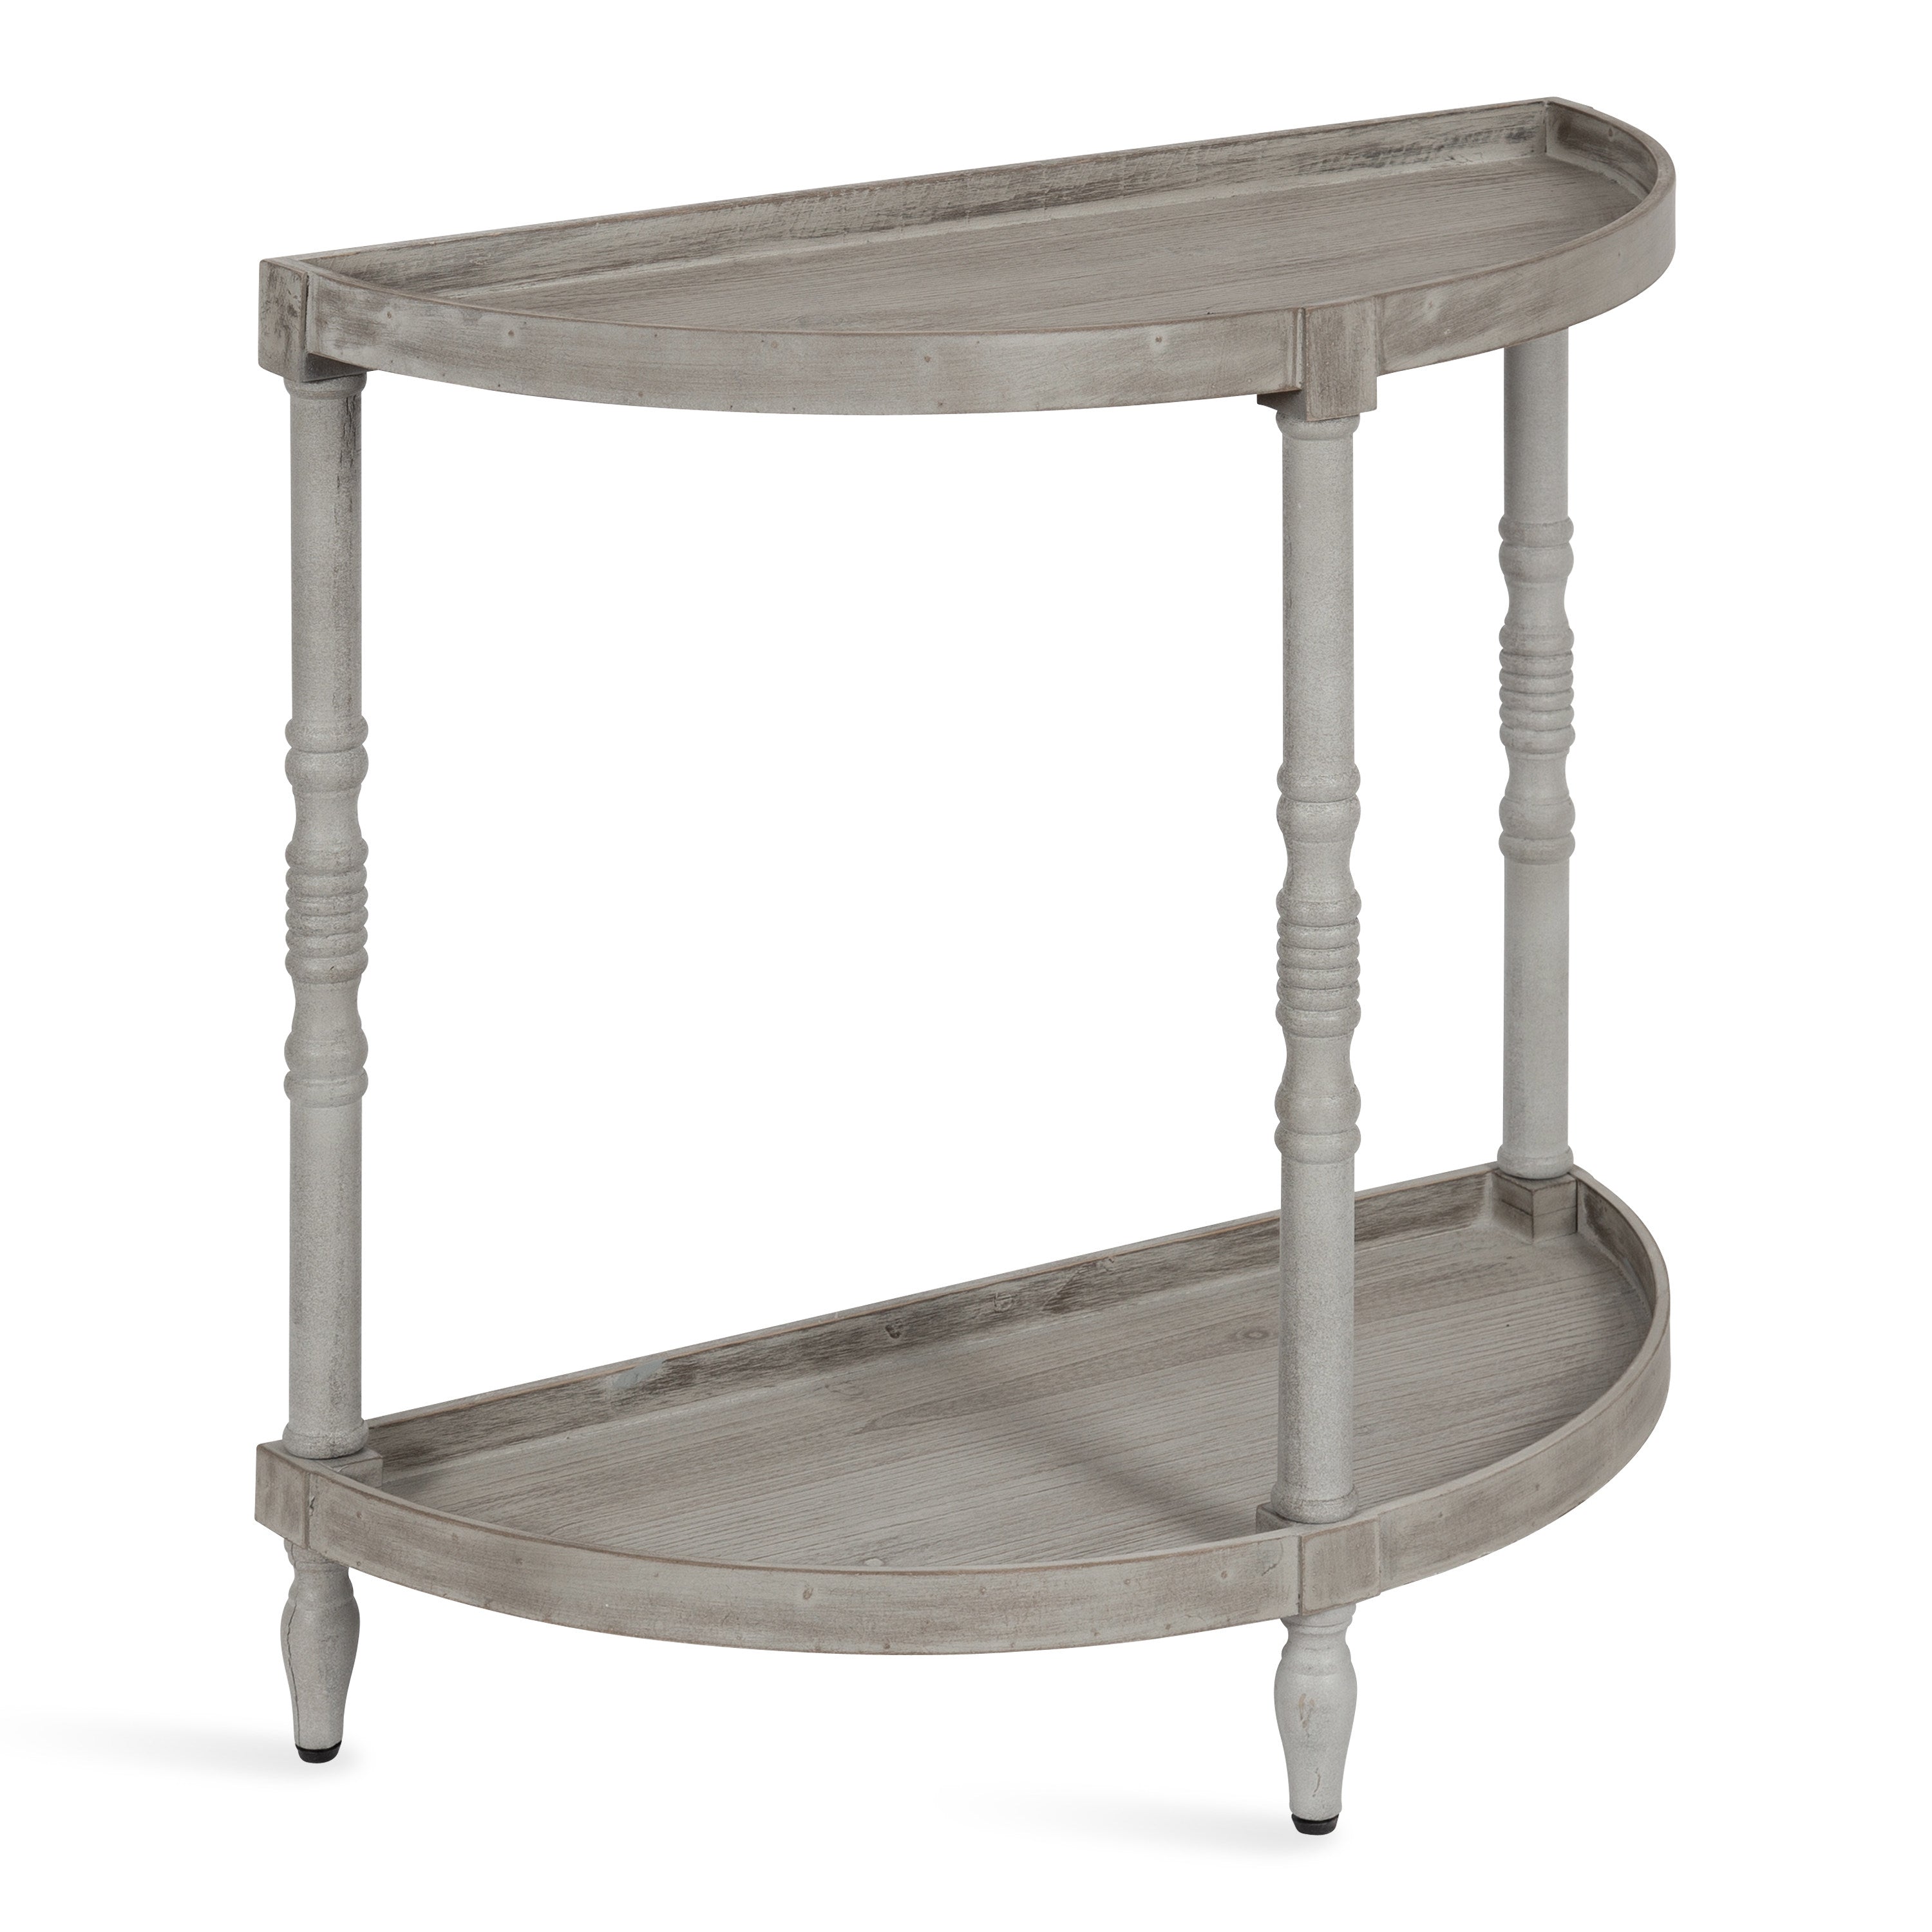 Bellport Wood Console Table with Shelf